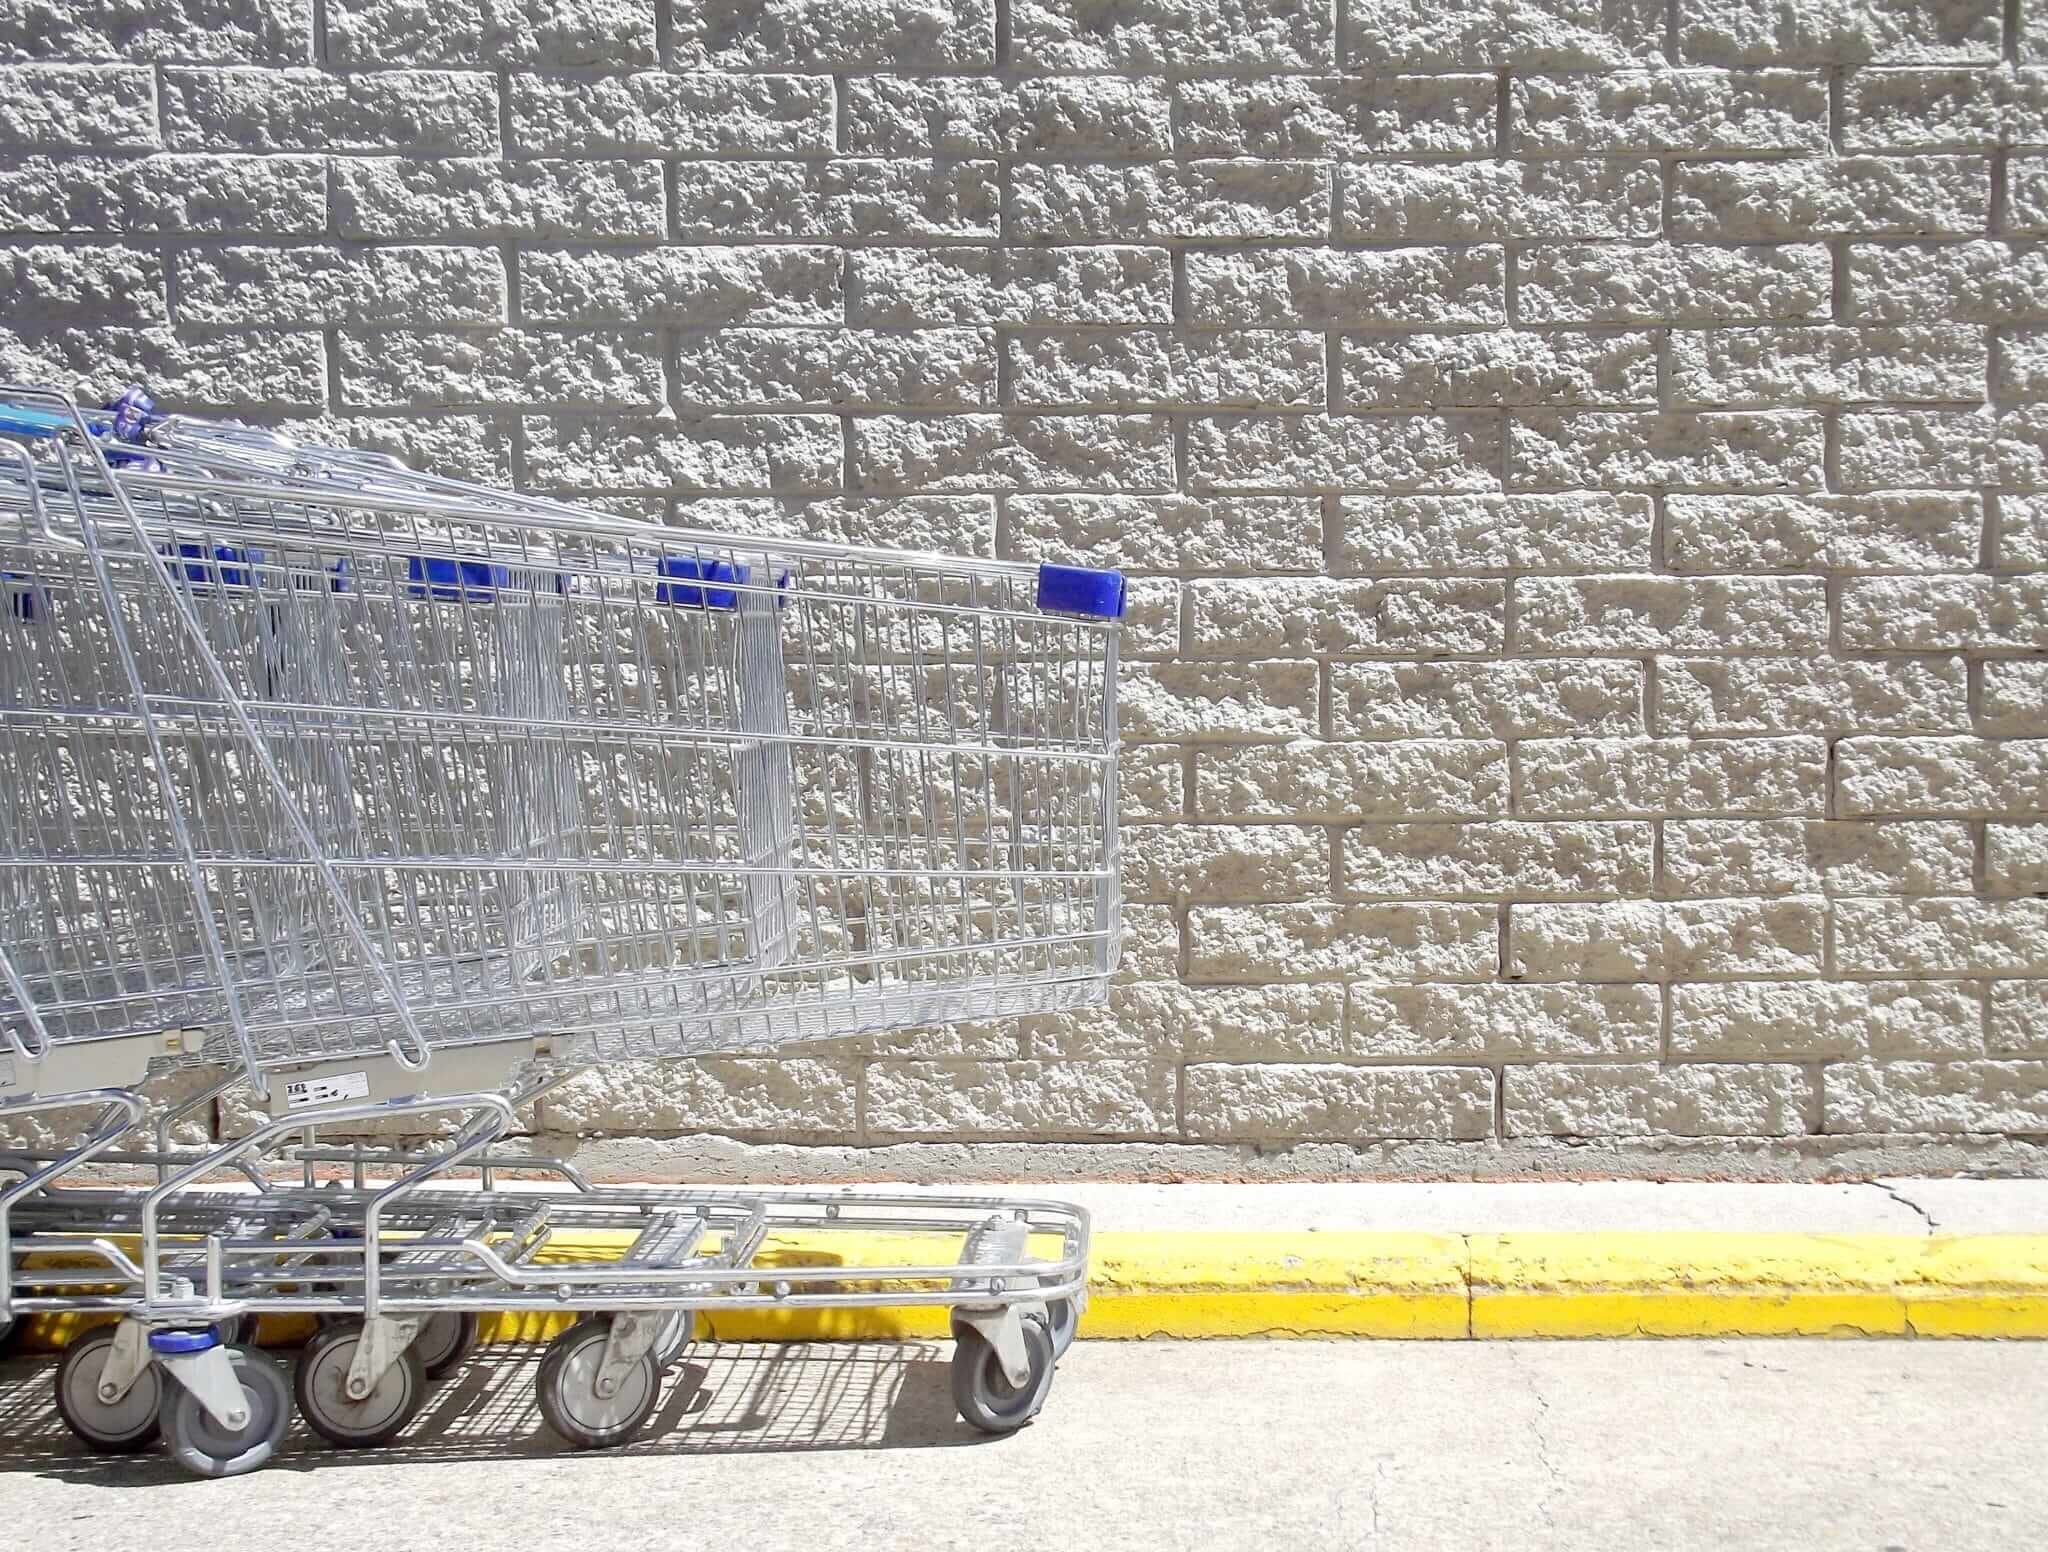 Shopping carts lined up in a Walmart parking lot 